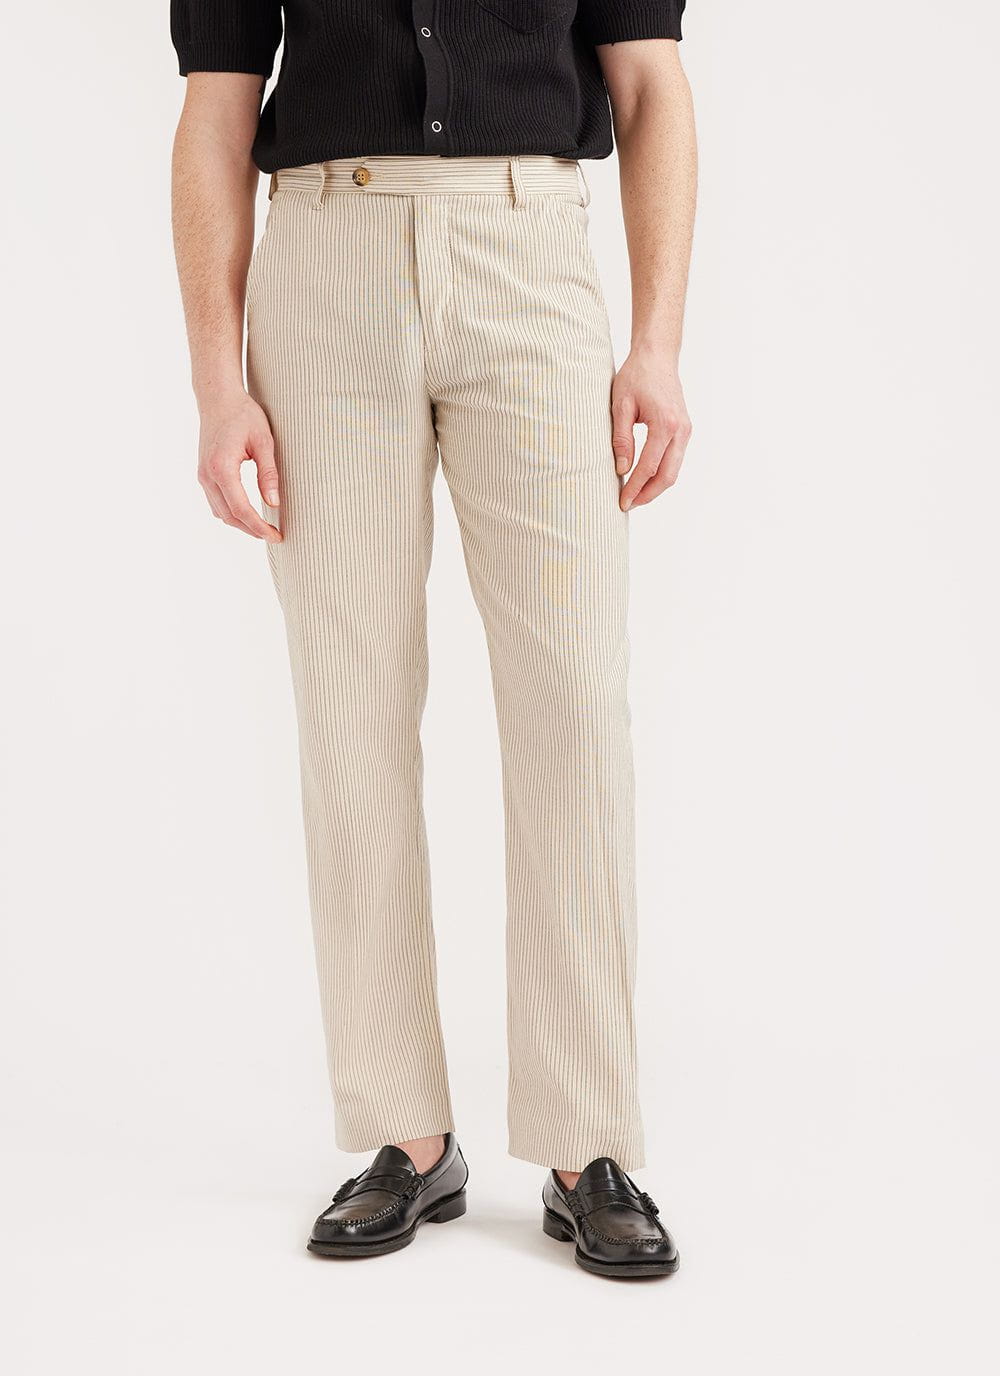 Scotch and Soda Hope High-Waisted Trousers Regular Length Natural